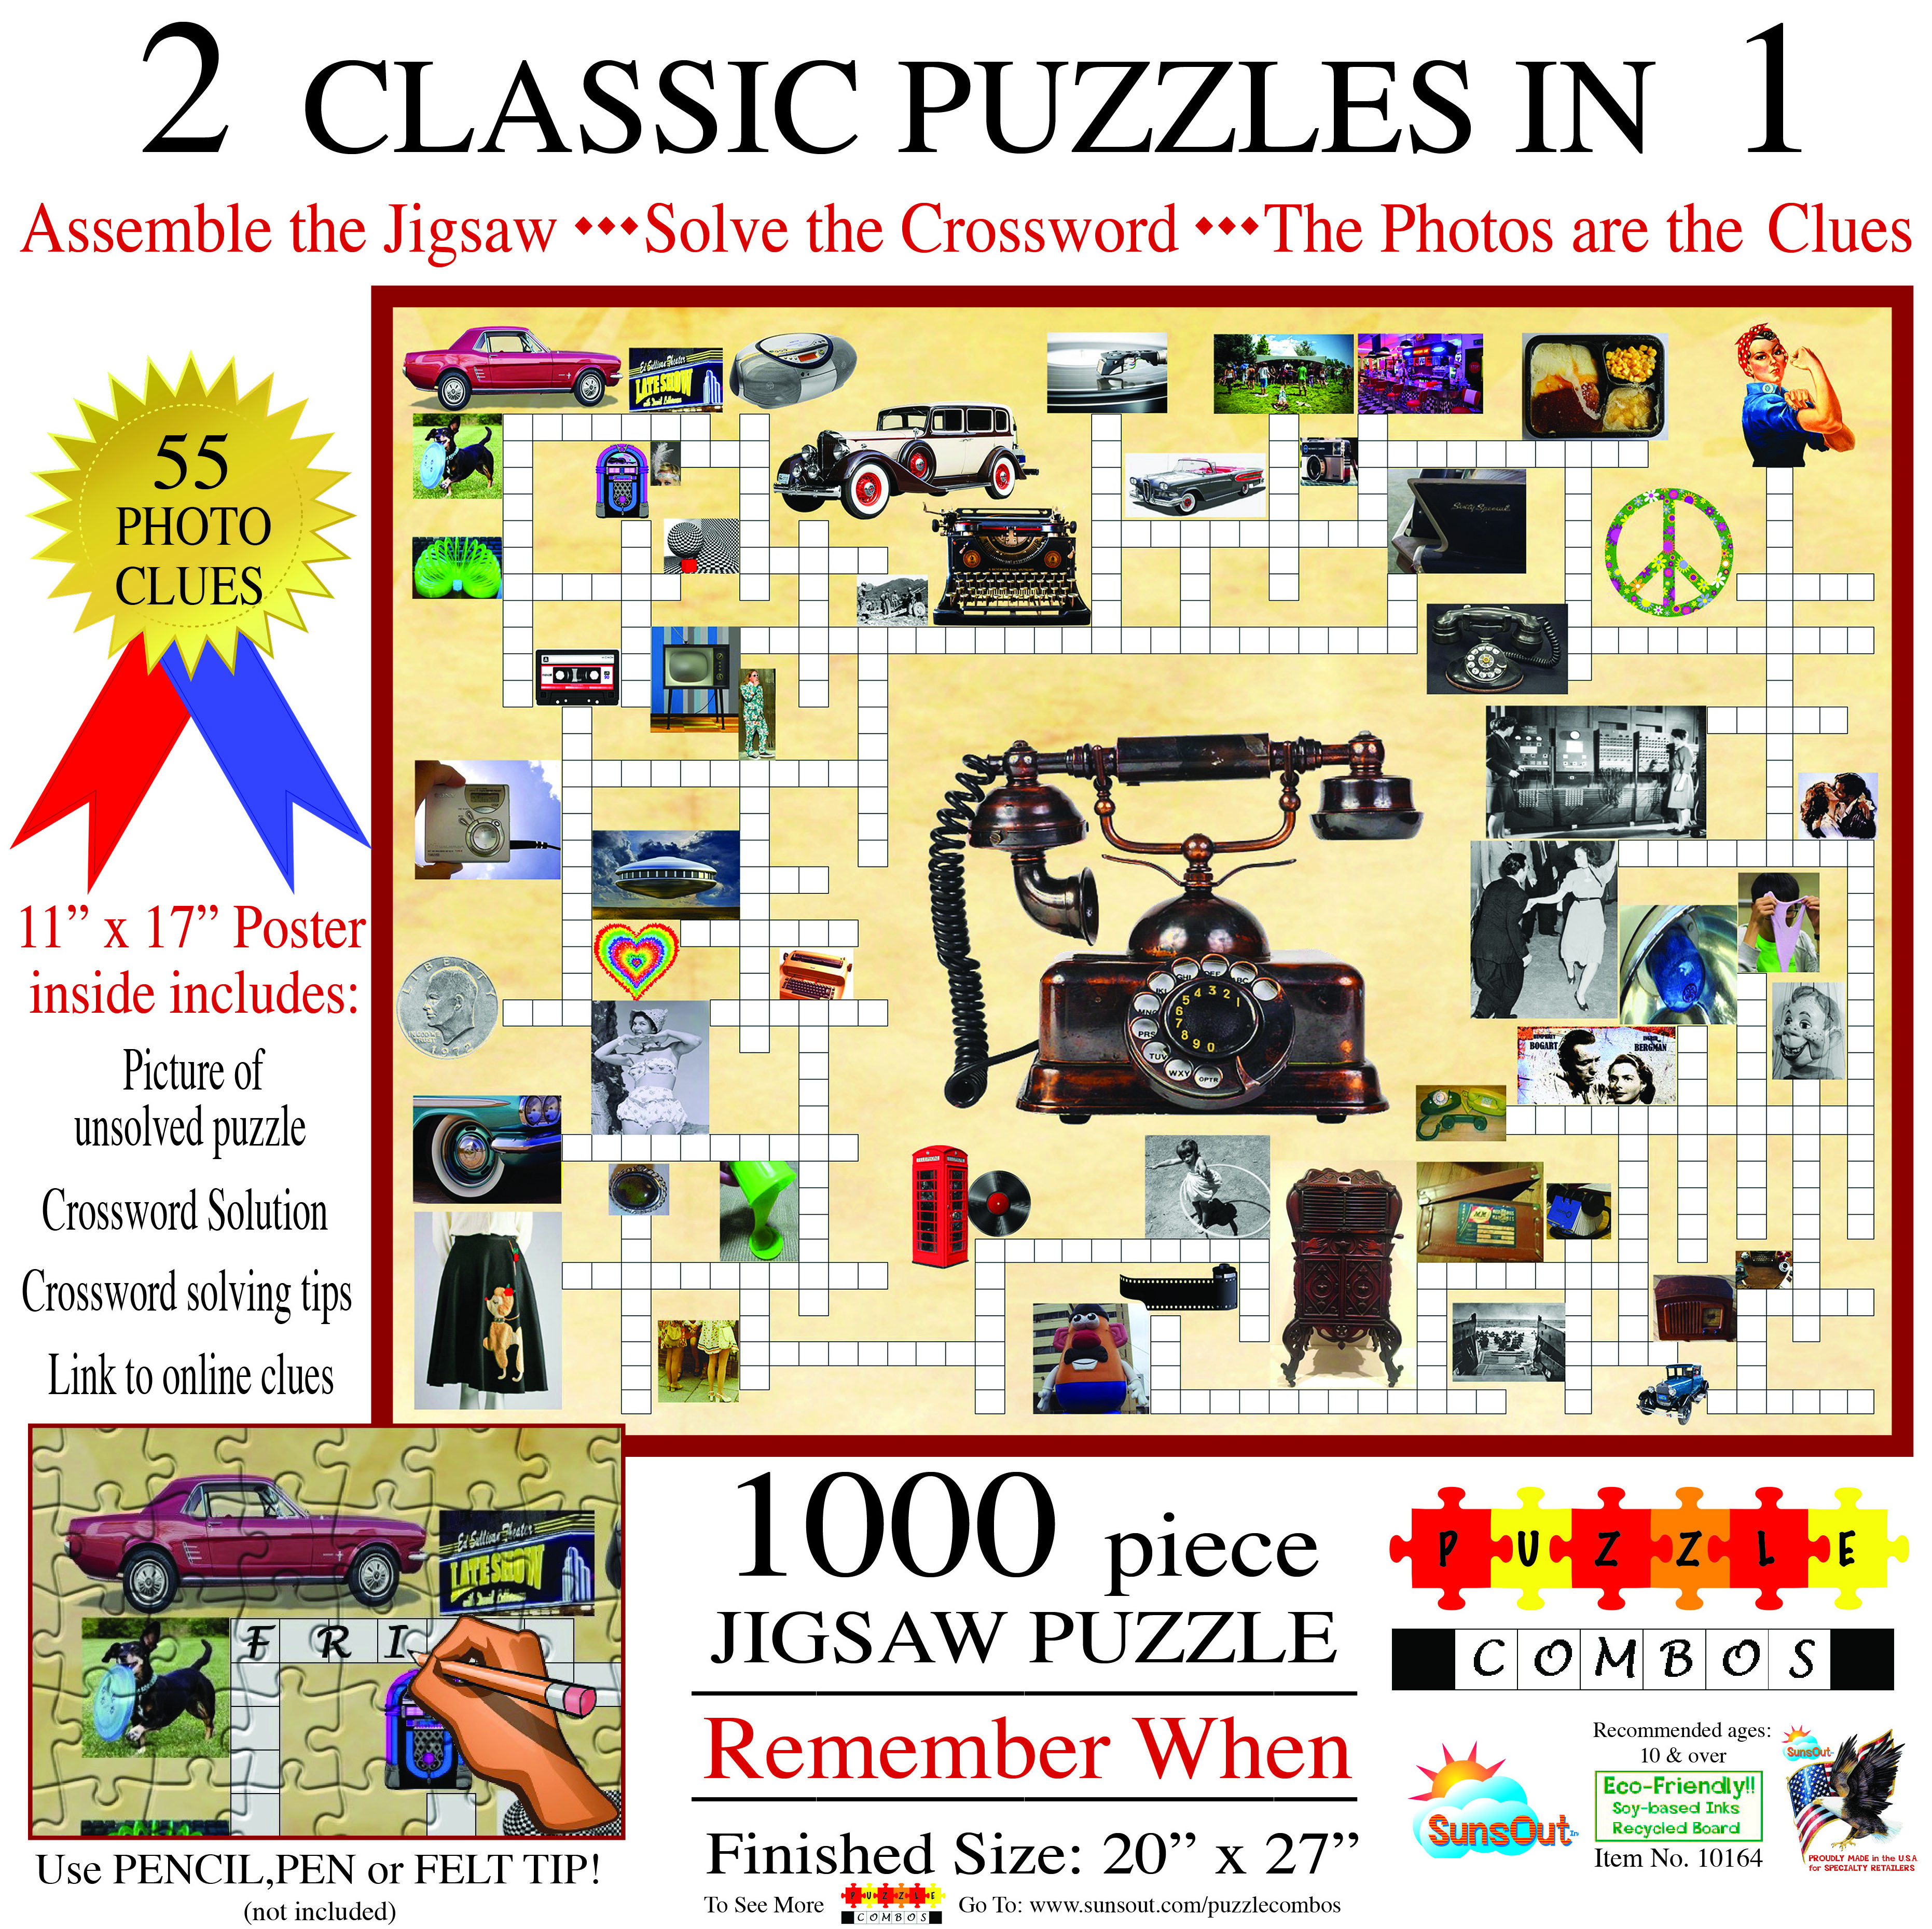 sunsout irv brechner - puzzle combo: remember when 1000 teile puzzle -10164